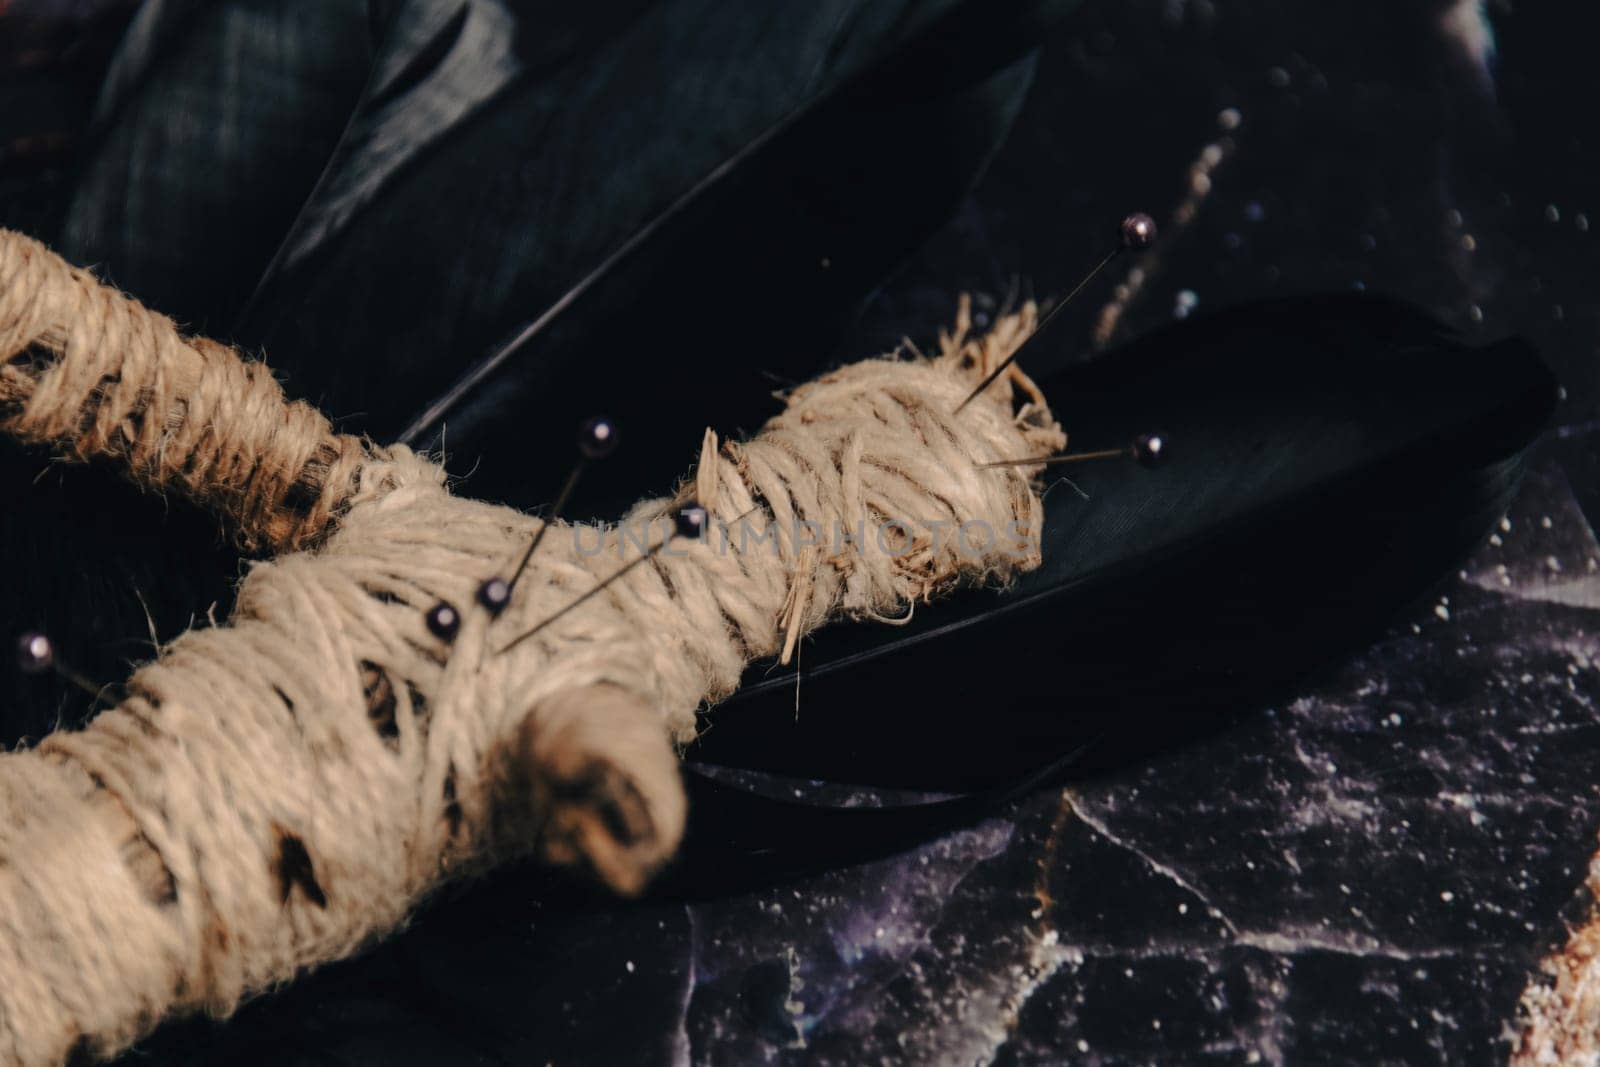 A handmade voodoo doll with pins, set against a rustic backdrop, evoking occult practices